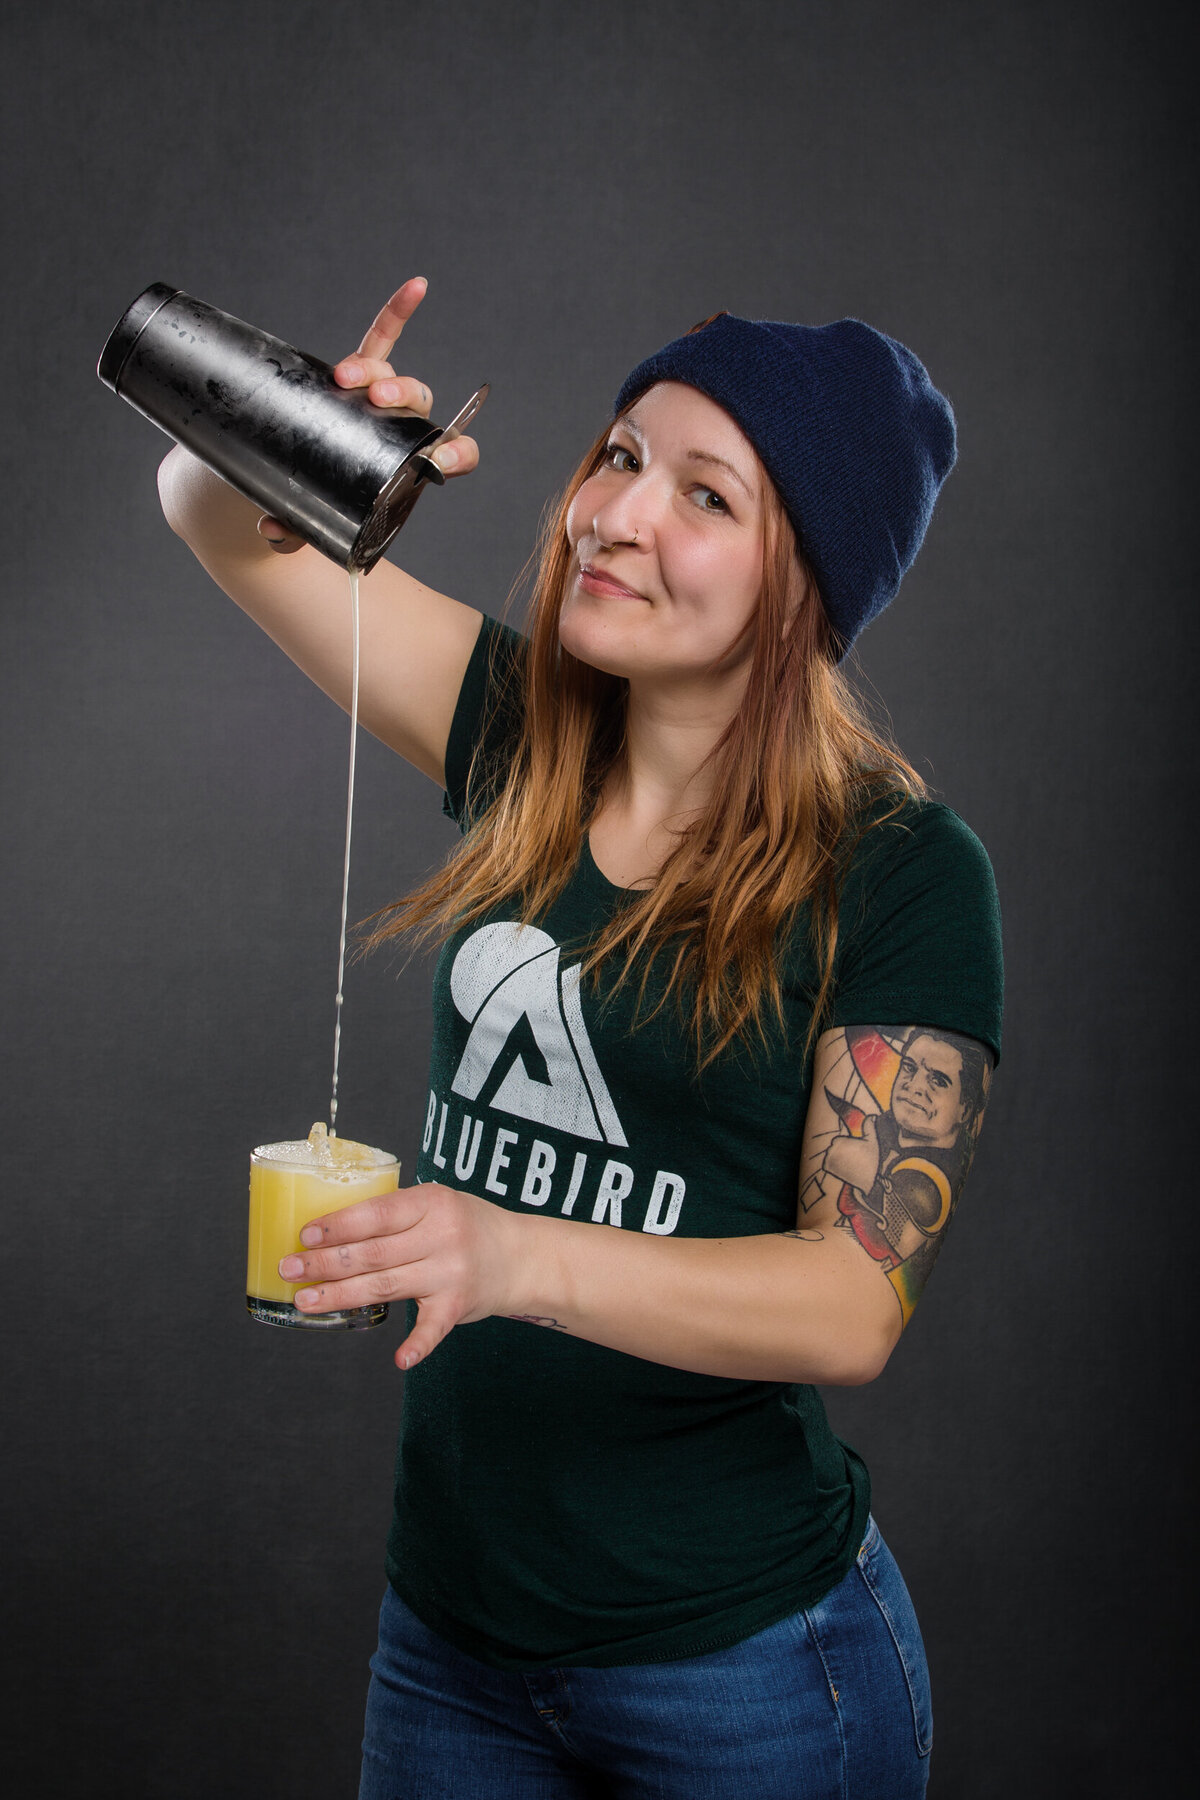 Branding photo of a woman bar tender pouring drinks